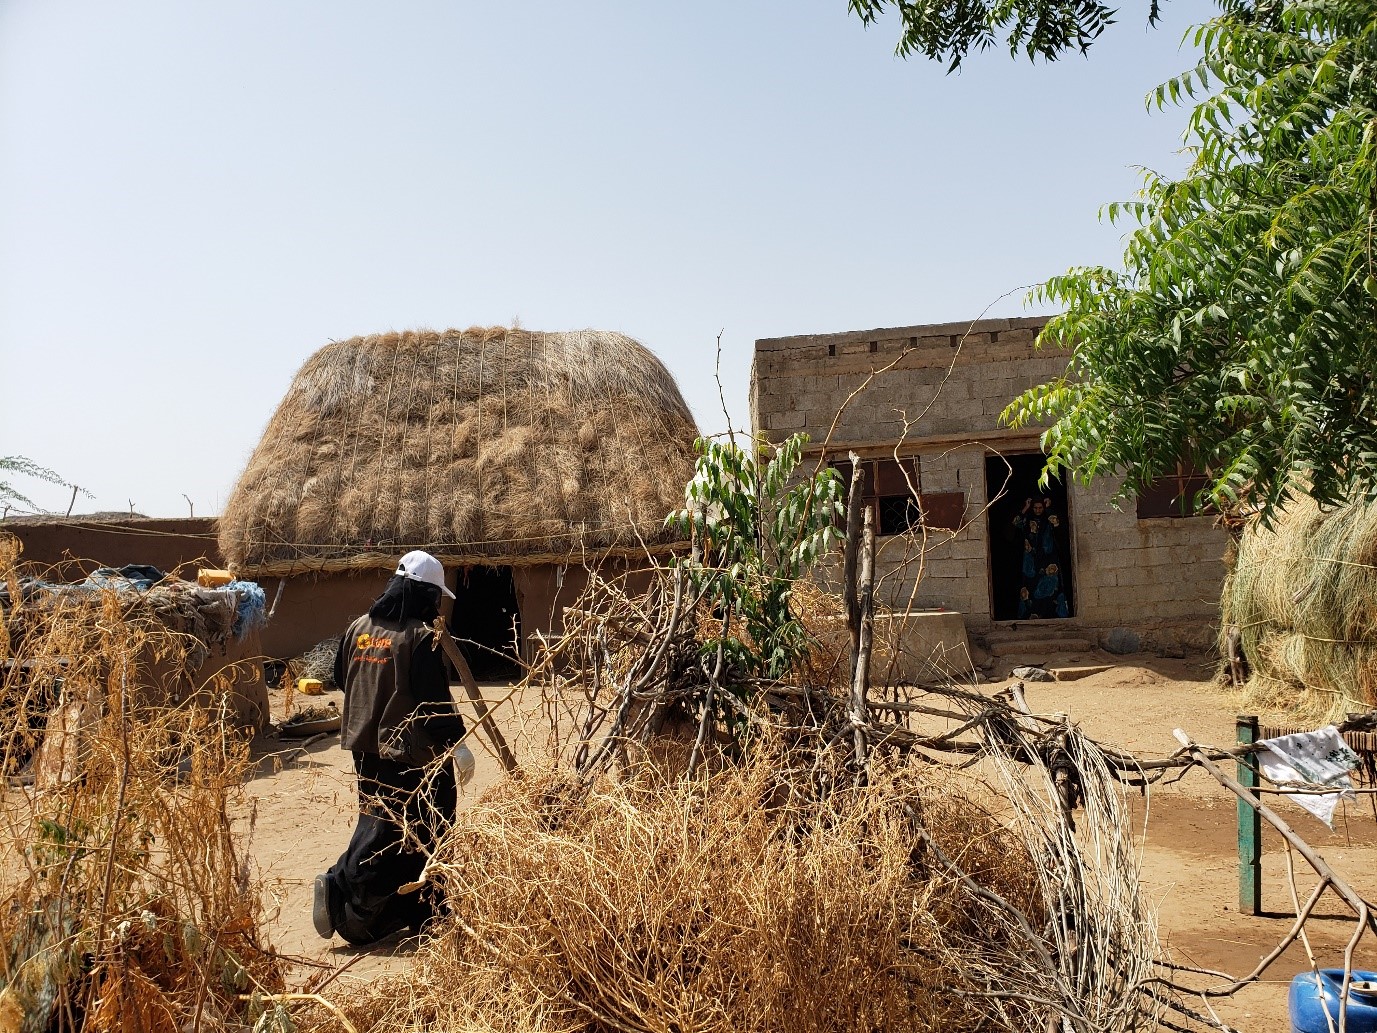 A woman walking in front of a hut